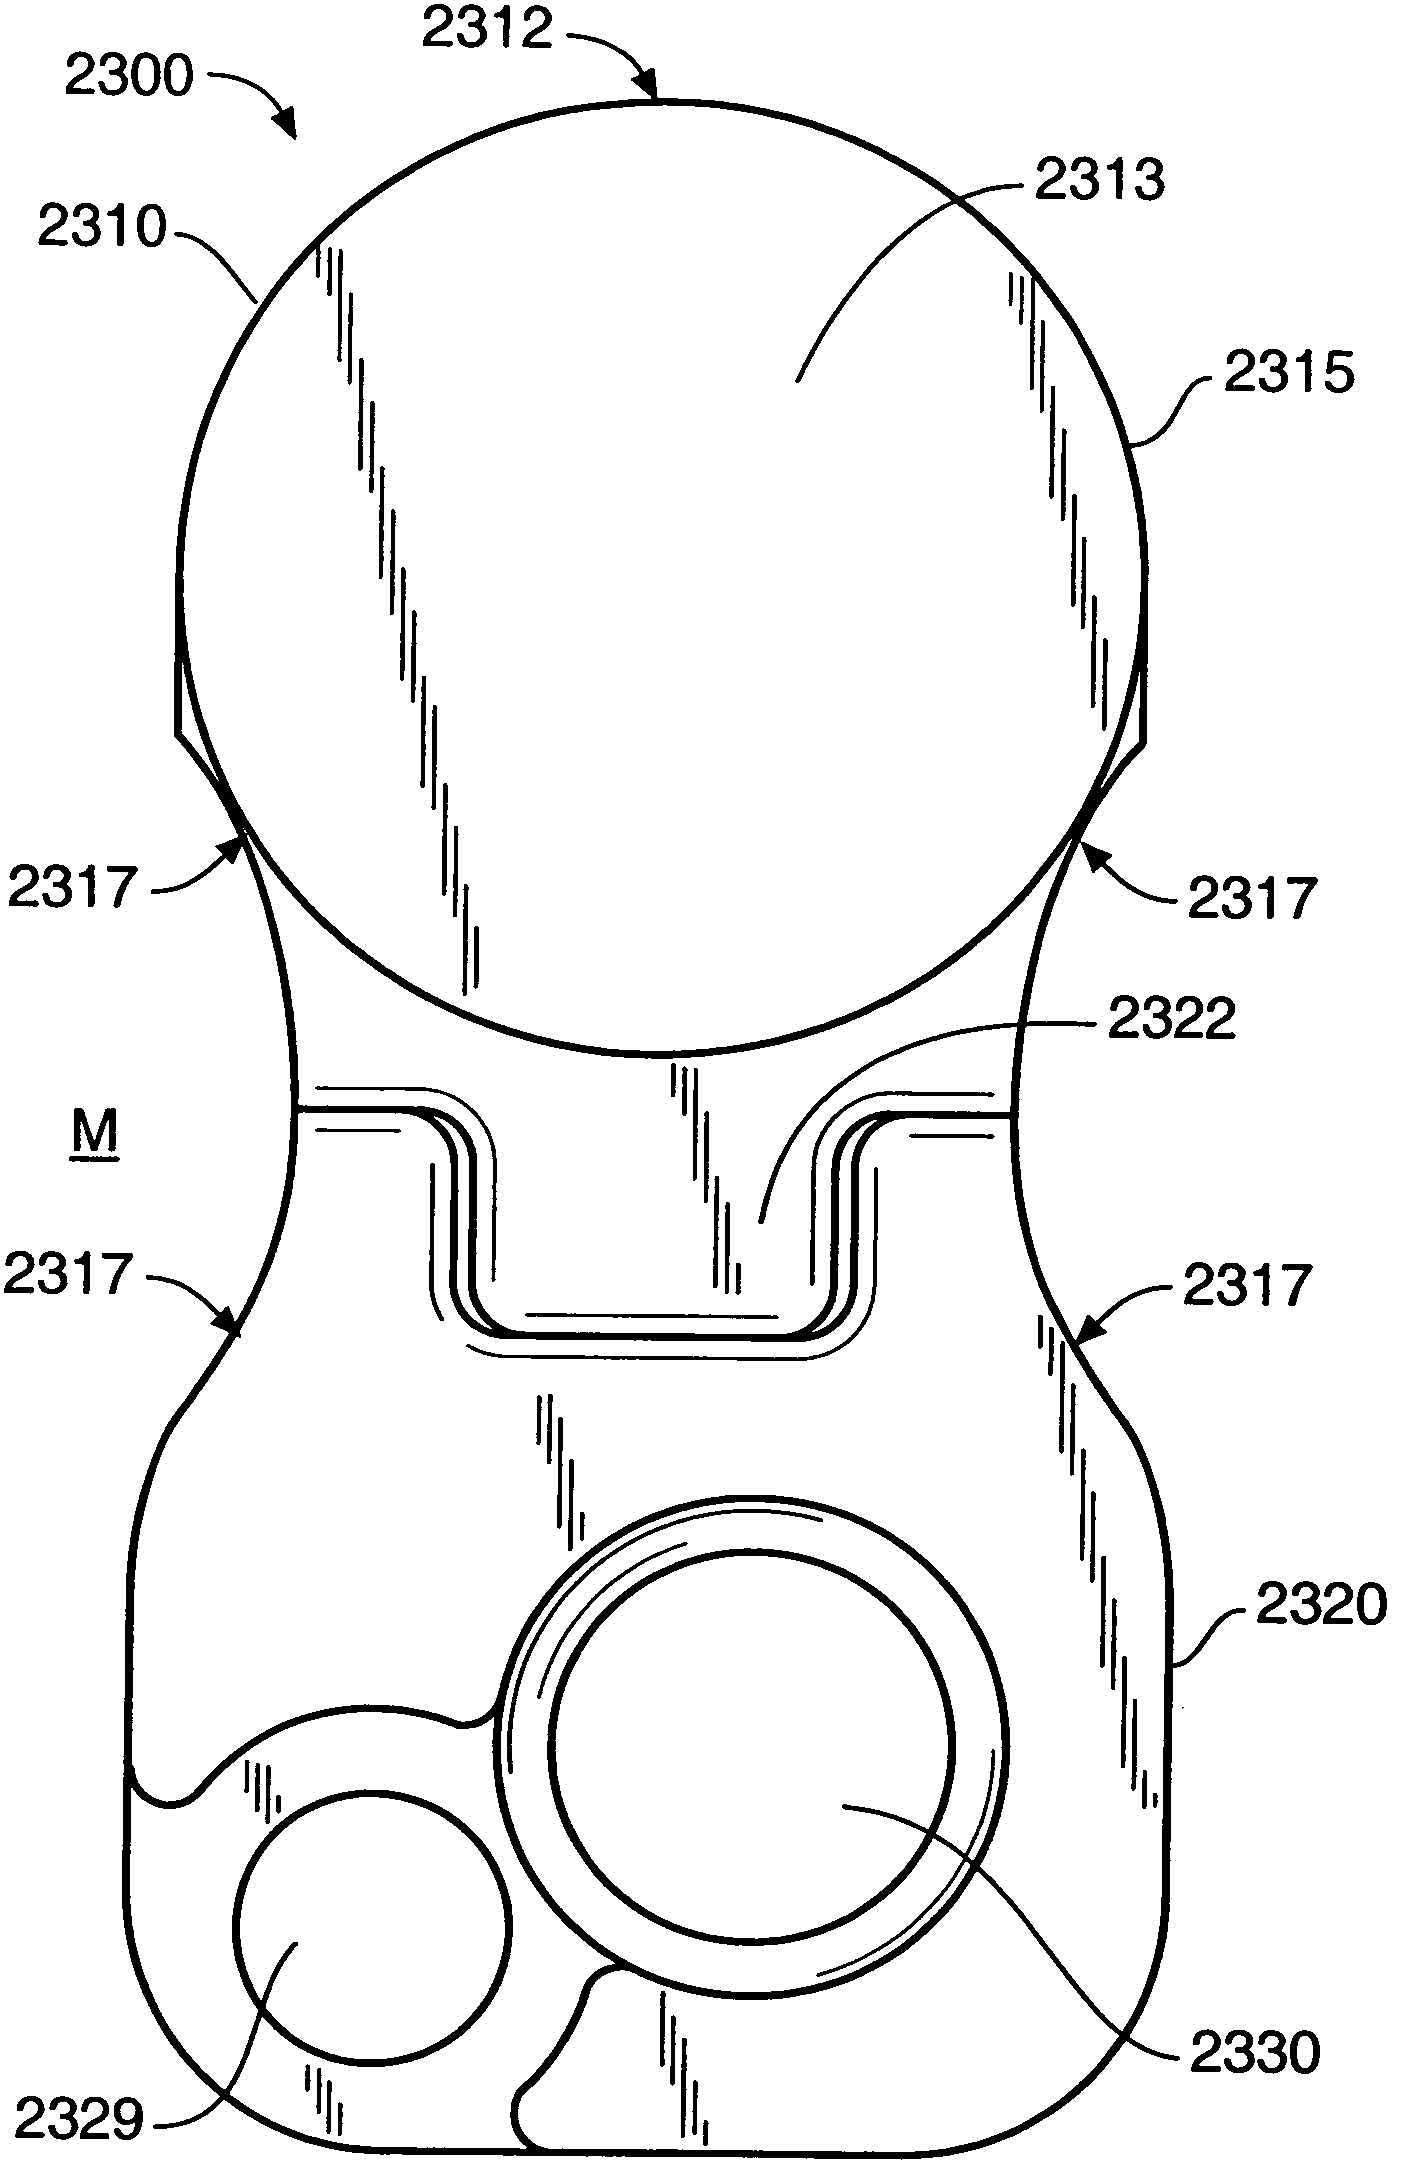 Inter-cervical facet implant with locking screw and method